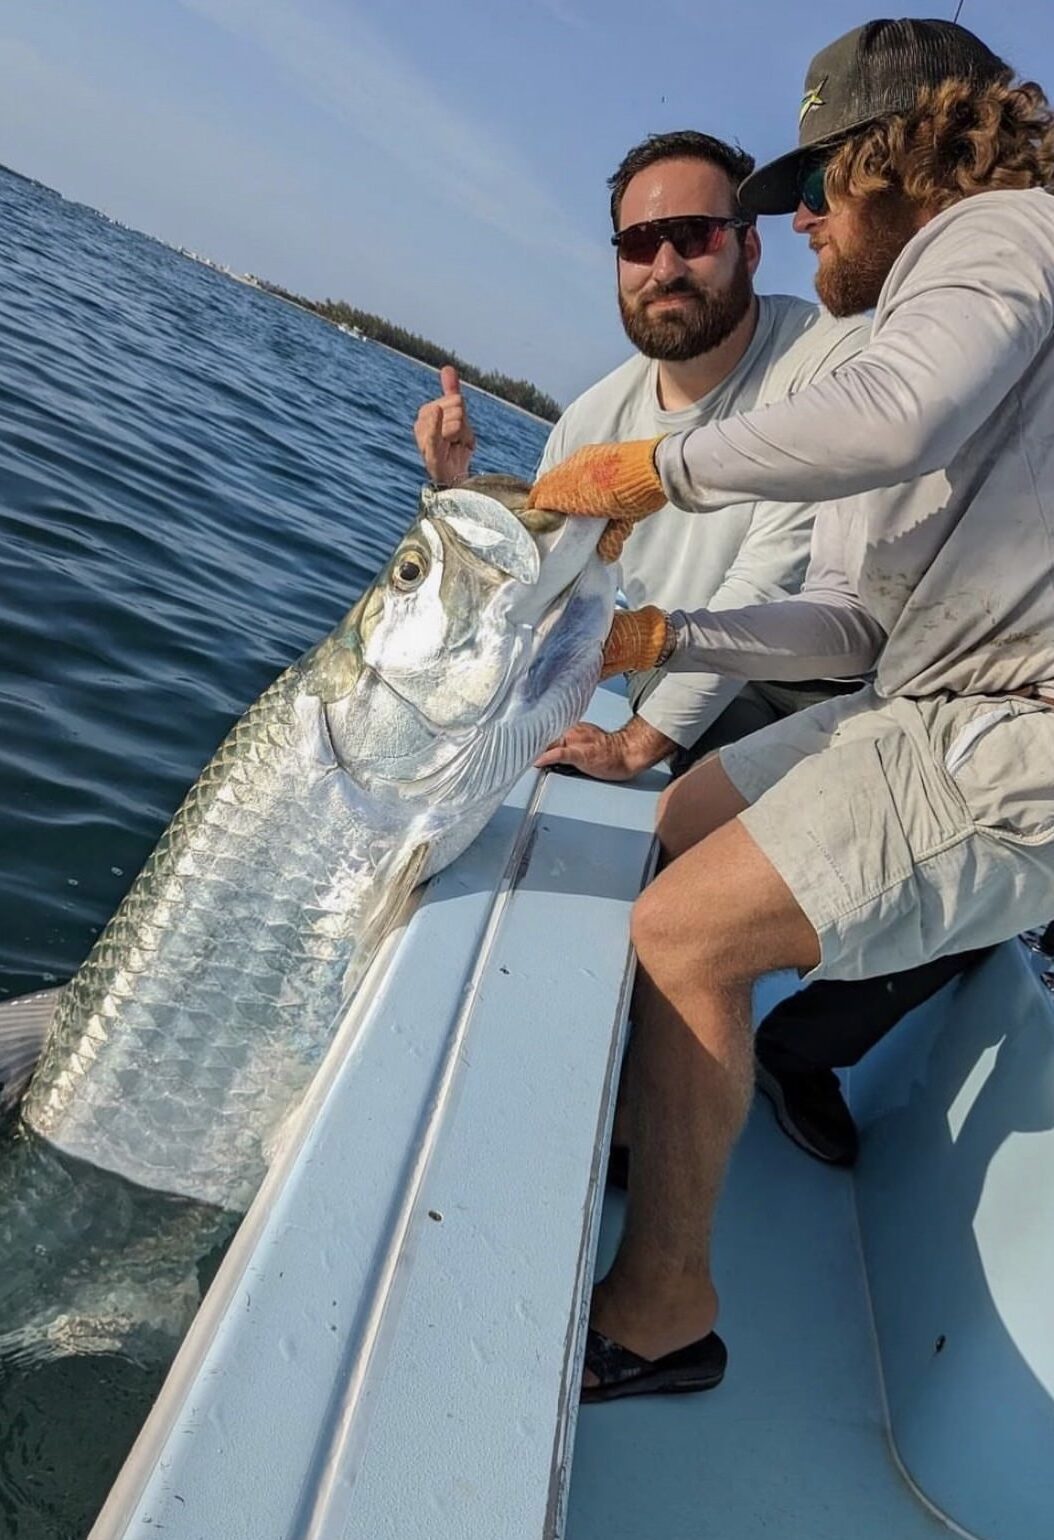 A group of friends fighting a tarpon while on a fishing charter amidst the scenic waters of Key West, Florida.